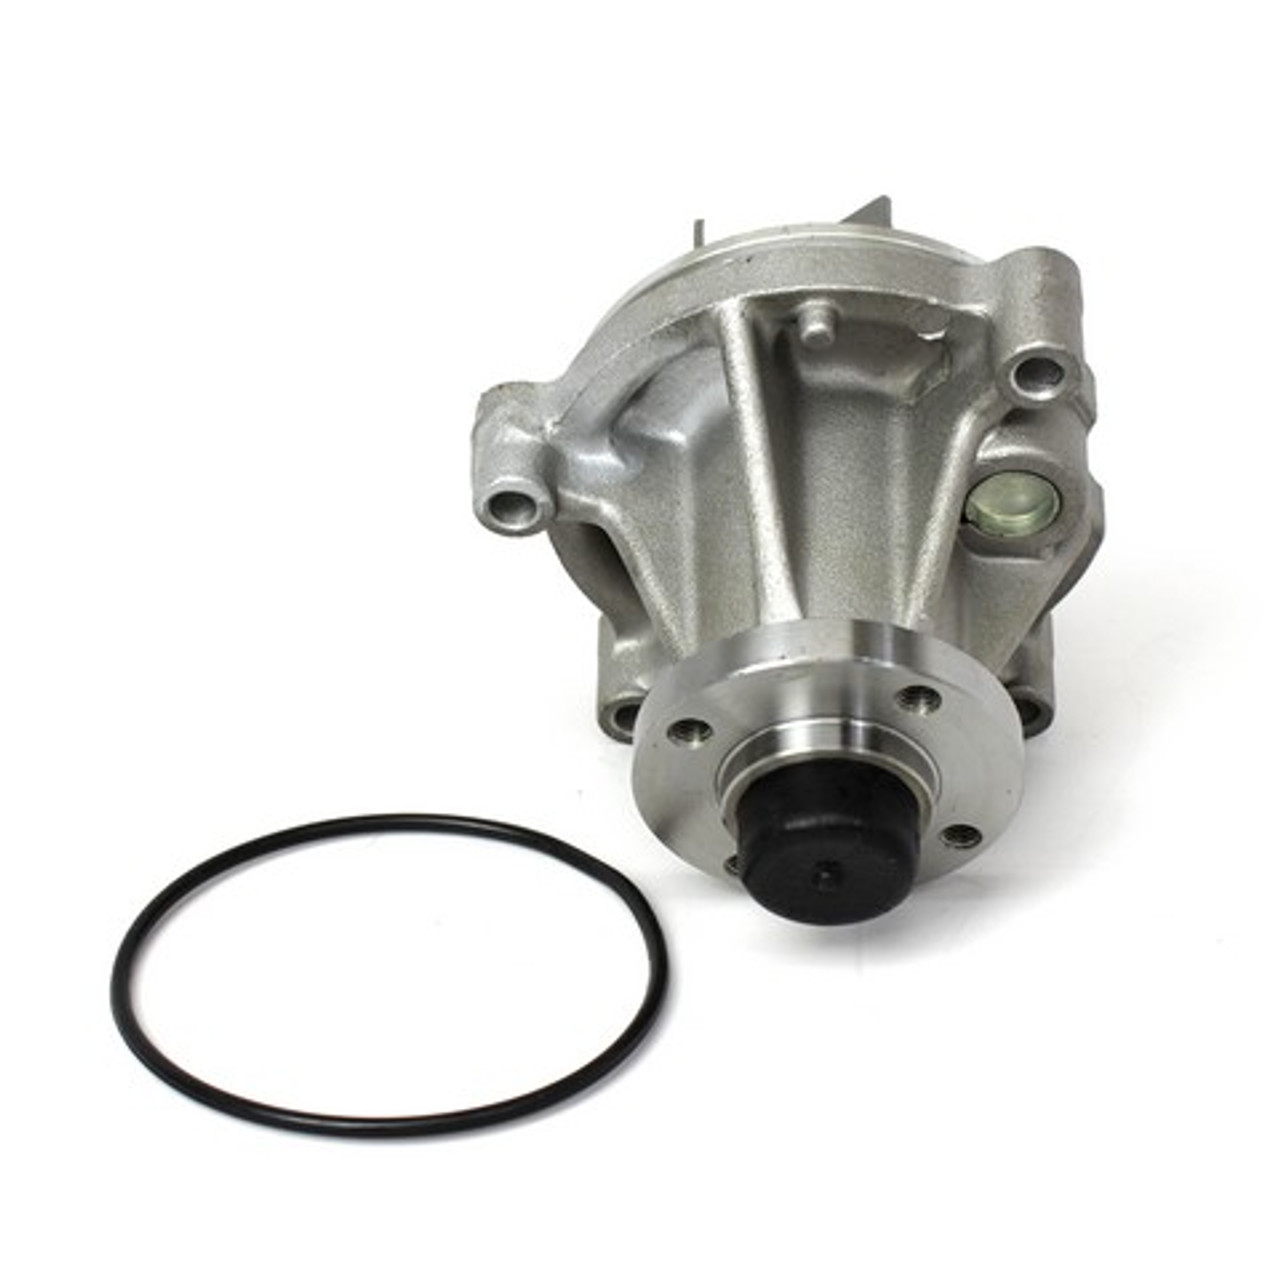 Water Pump 5.4L 2010 Ford E-250 - WP4170.46